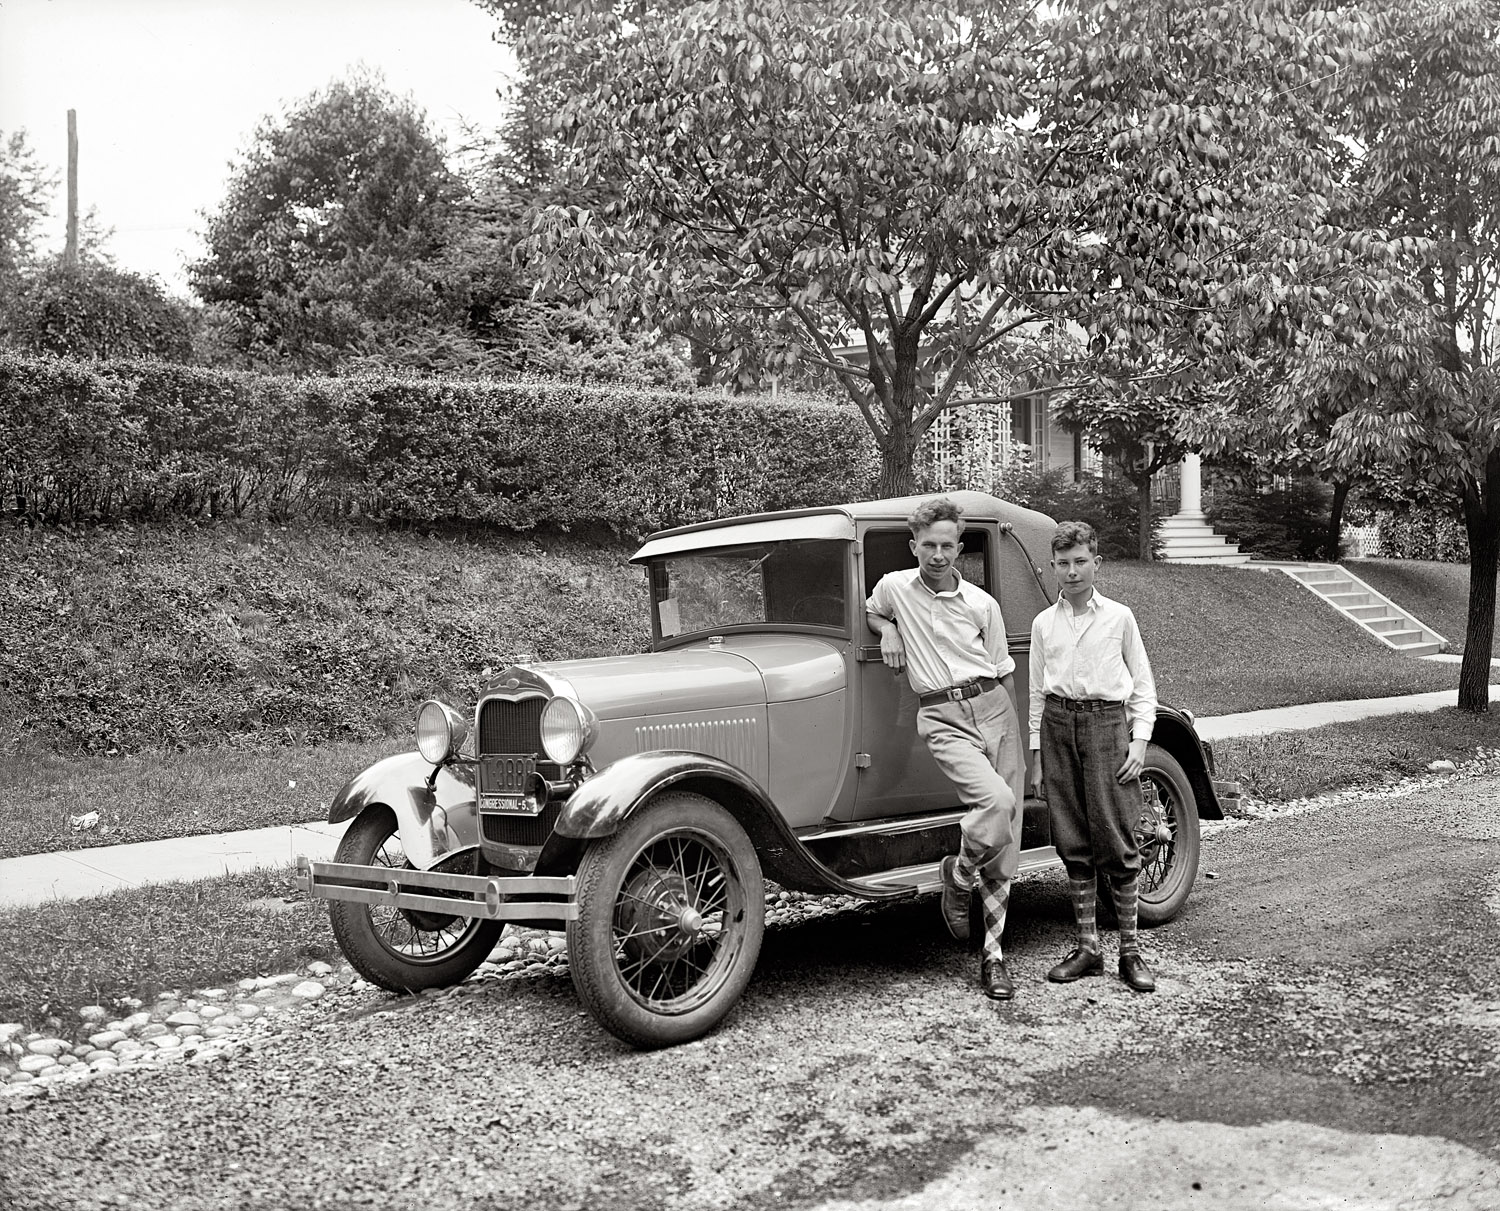 Washington, D.C., circa 1928. "Boys standing next to automobile." A Ford with congressional plates. View full size. National Photo Company glass negative.